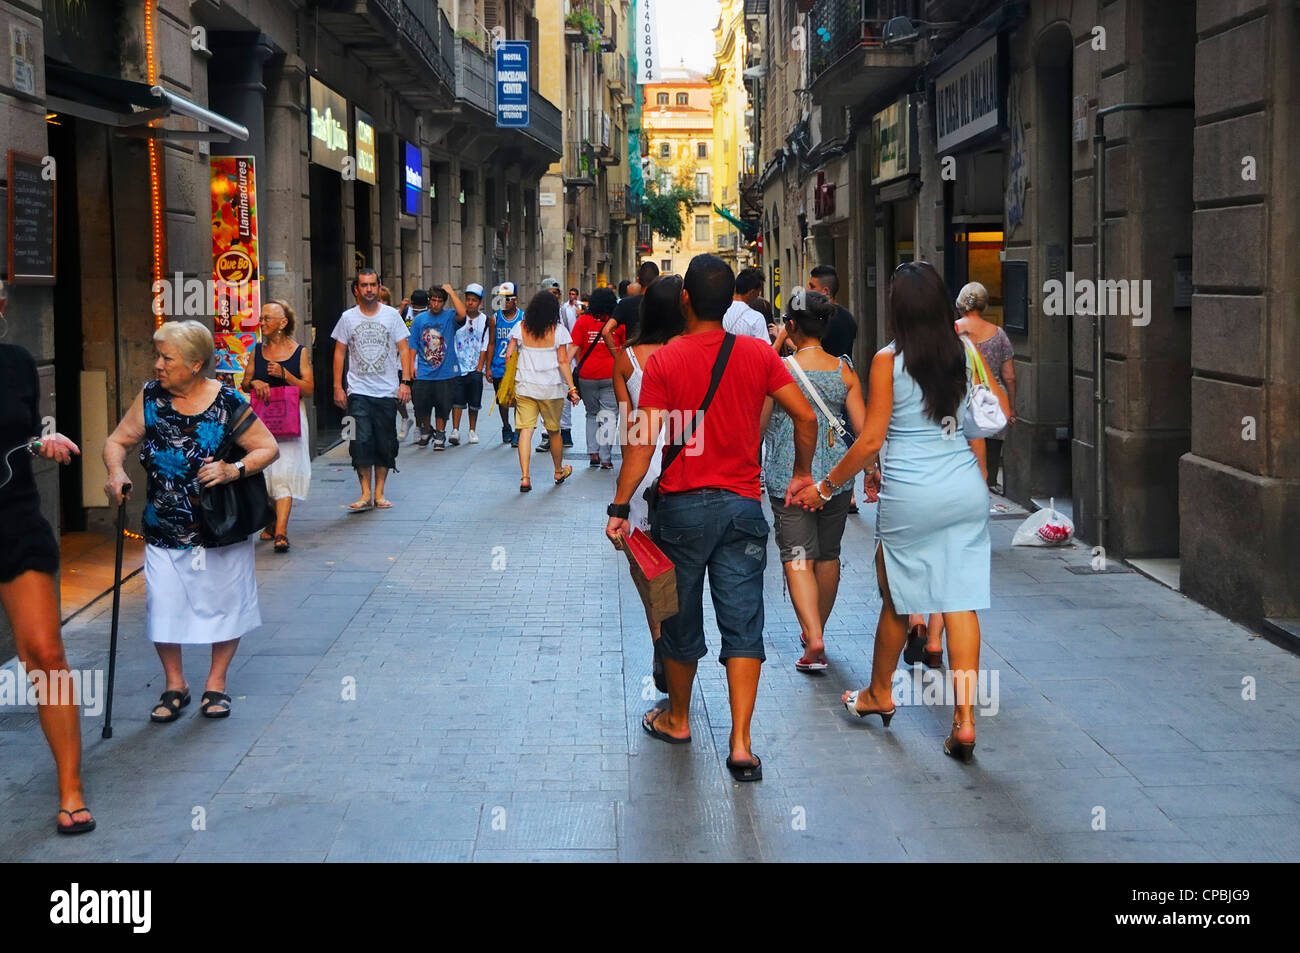 Tourists filled small streets in the Barri Gotic (Gothic quarter), Barcelona, Spain. Stock Photo